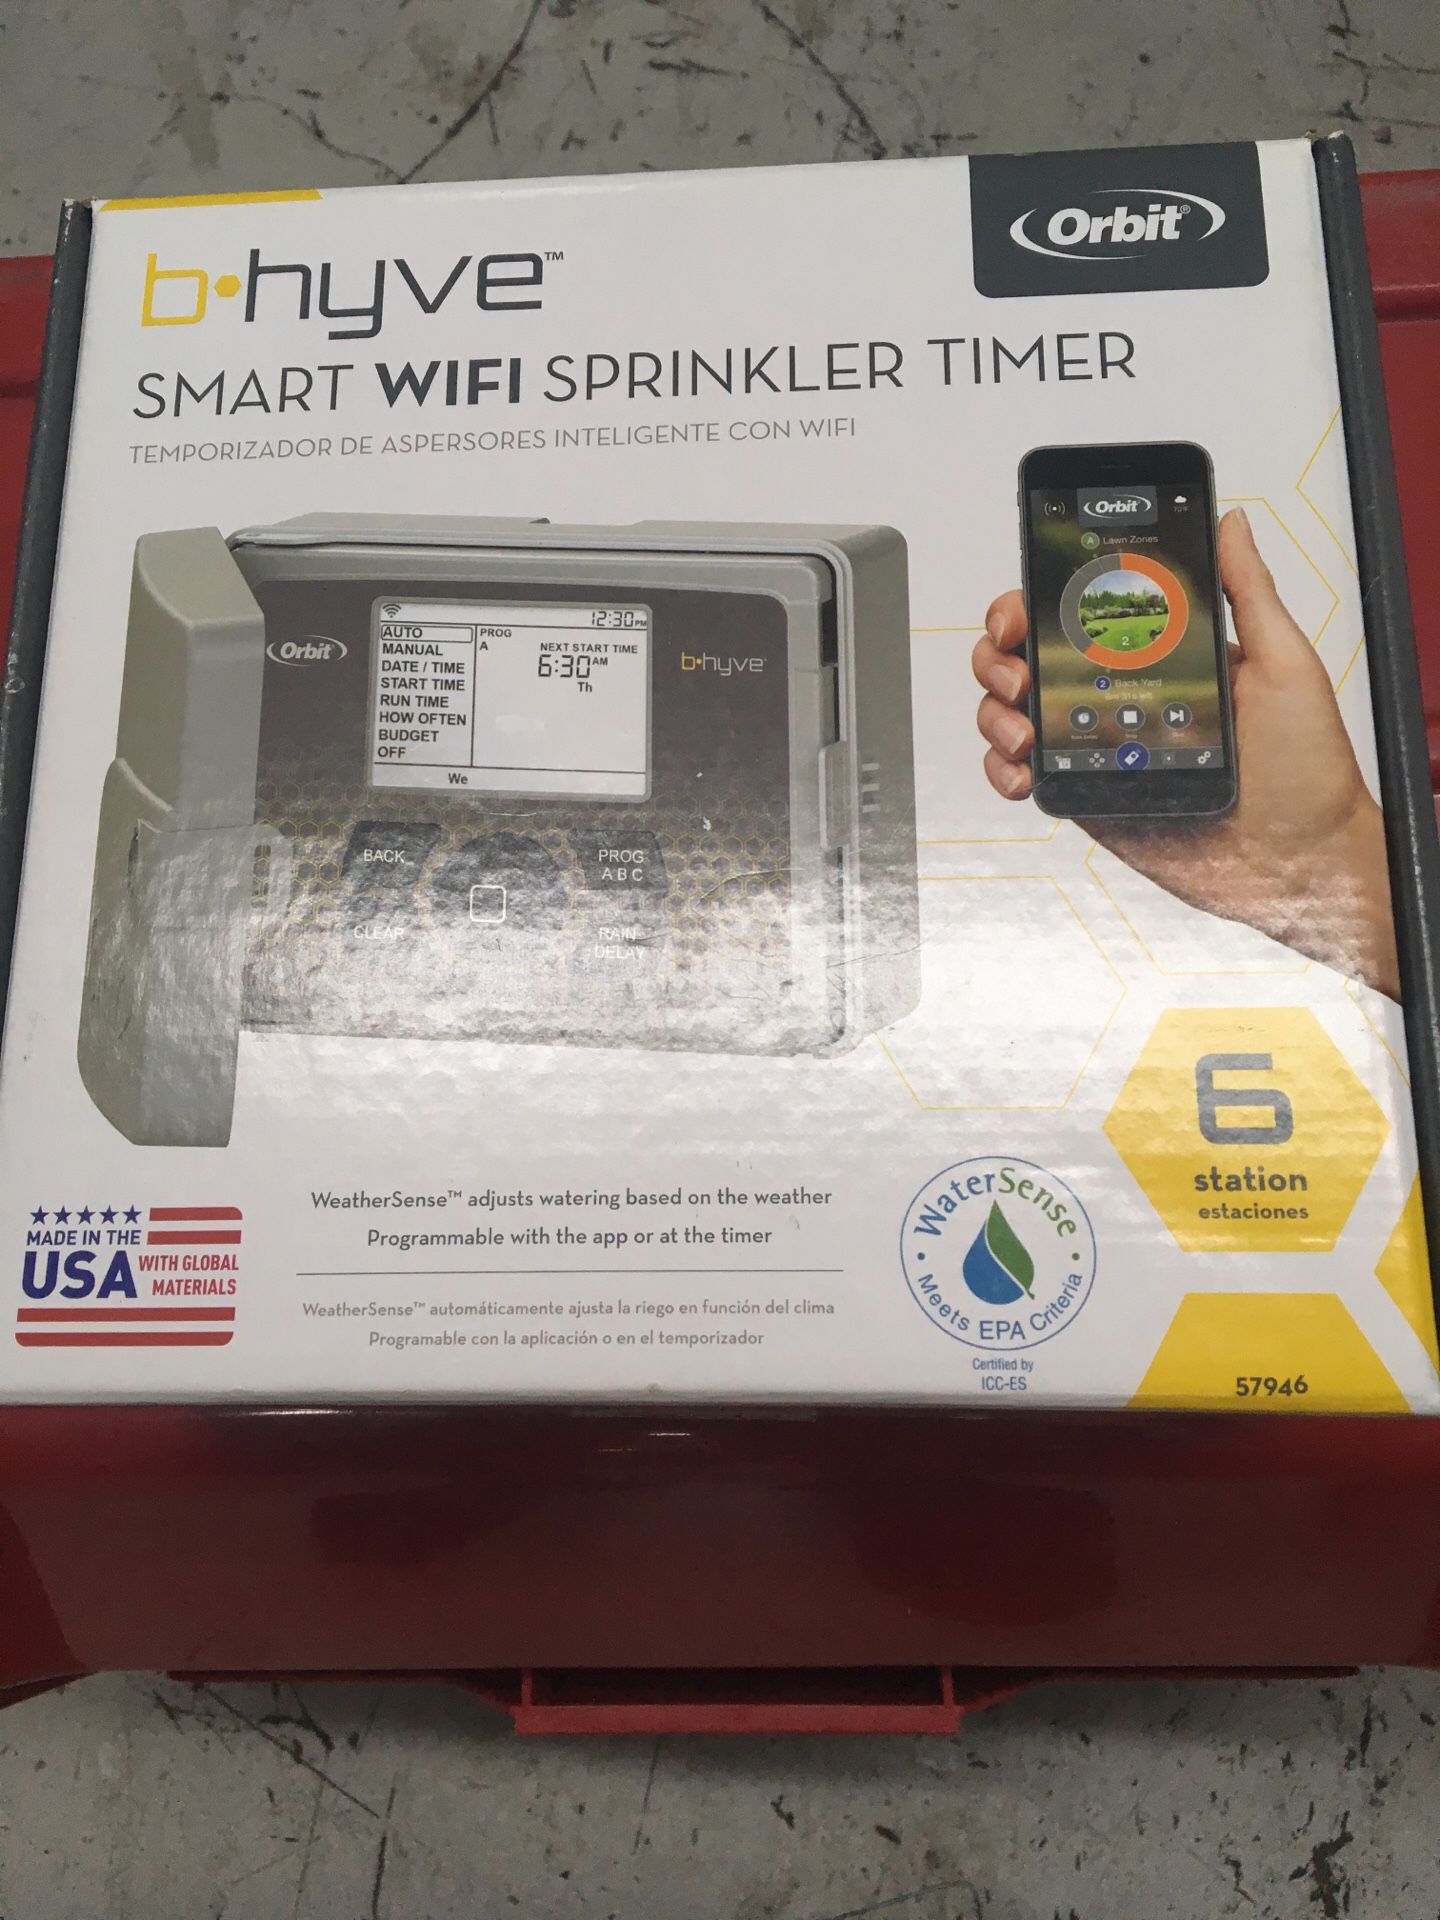 Bhyve by Orbit a smart WiFi 6 zone sprinkler timer can download the app for hands free Brand new in box